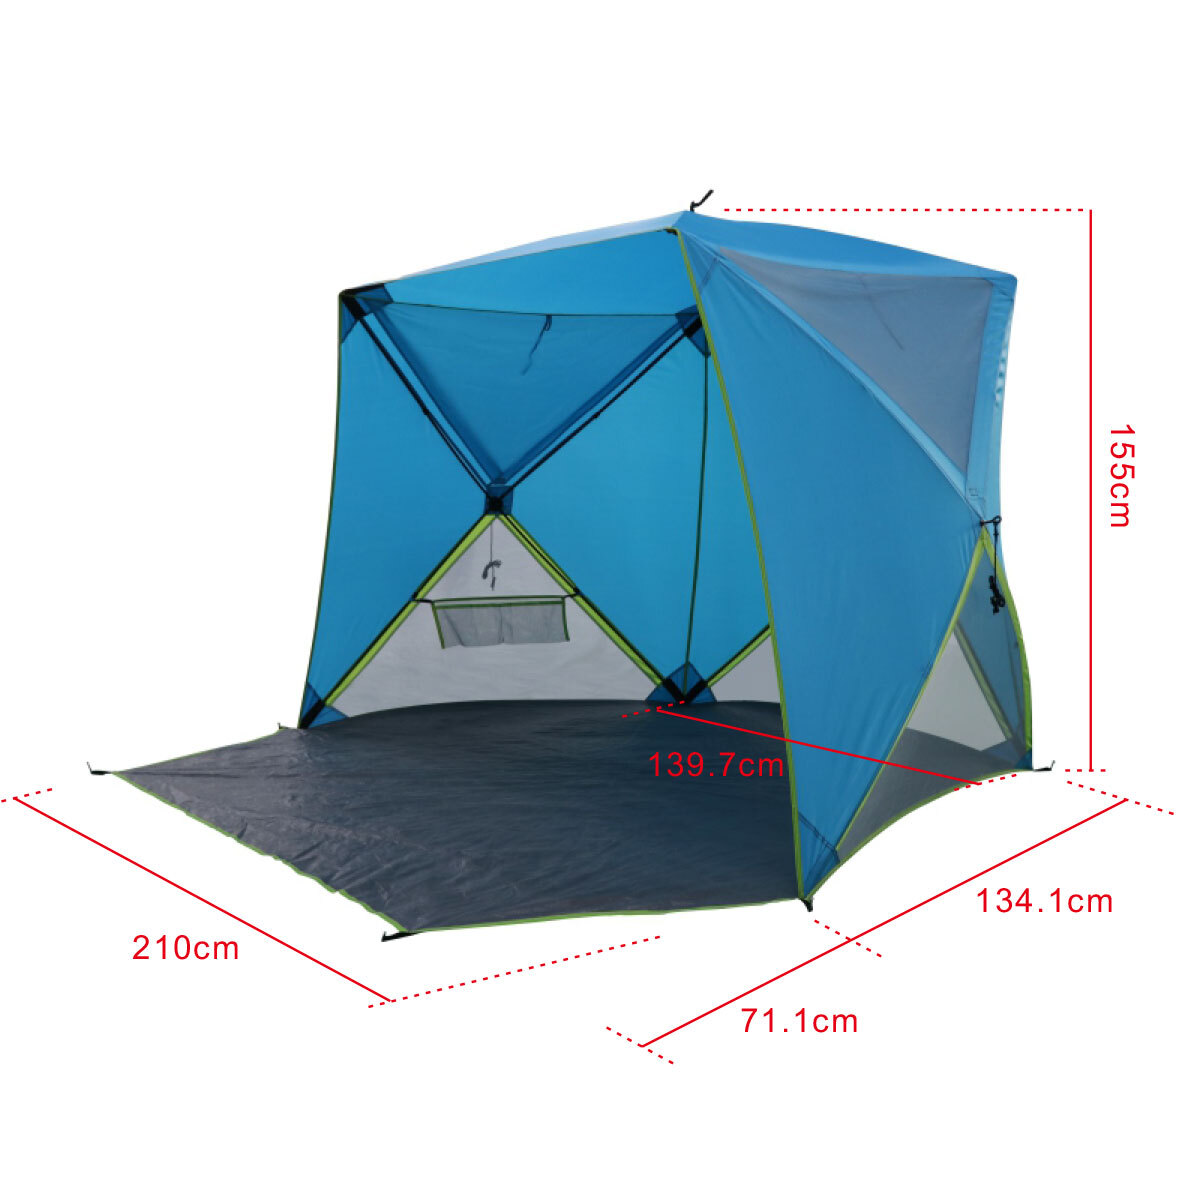 Old Bahama Bay 4.9 x 4.9ft (1.4 x 1.4m) Pop up Shelter with Windows